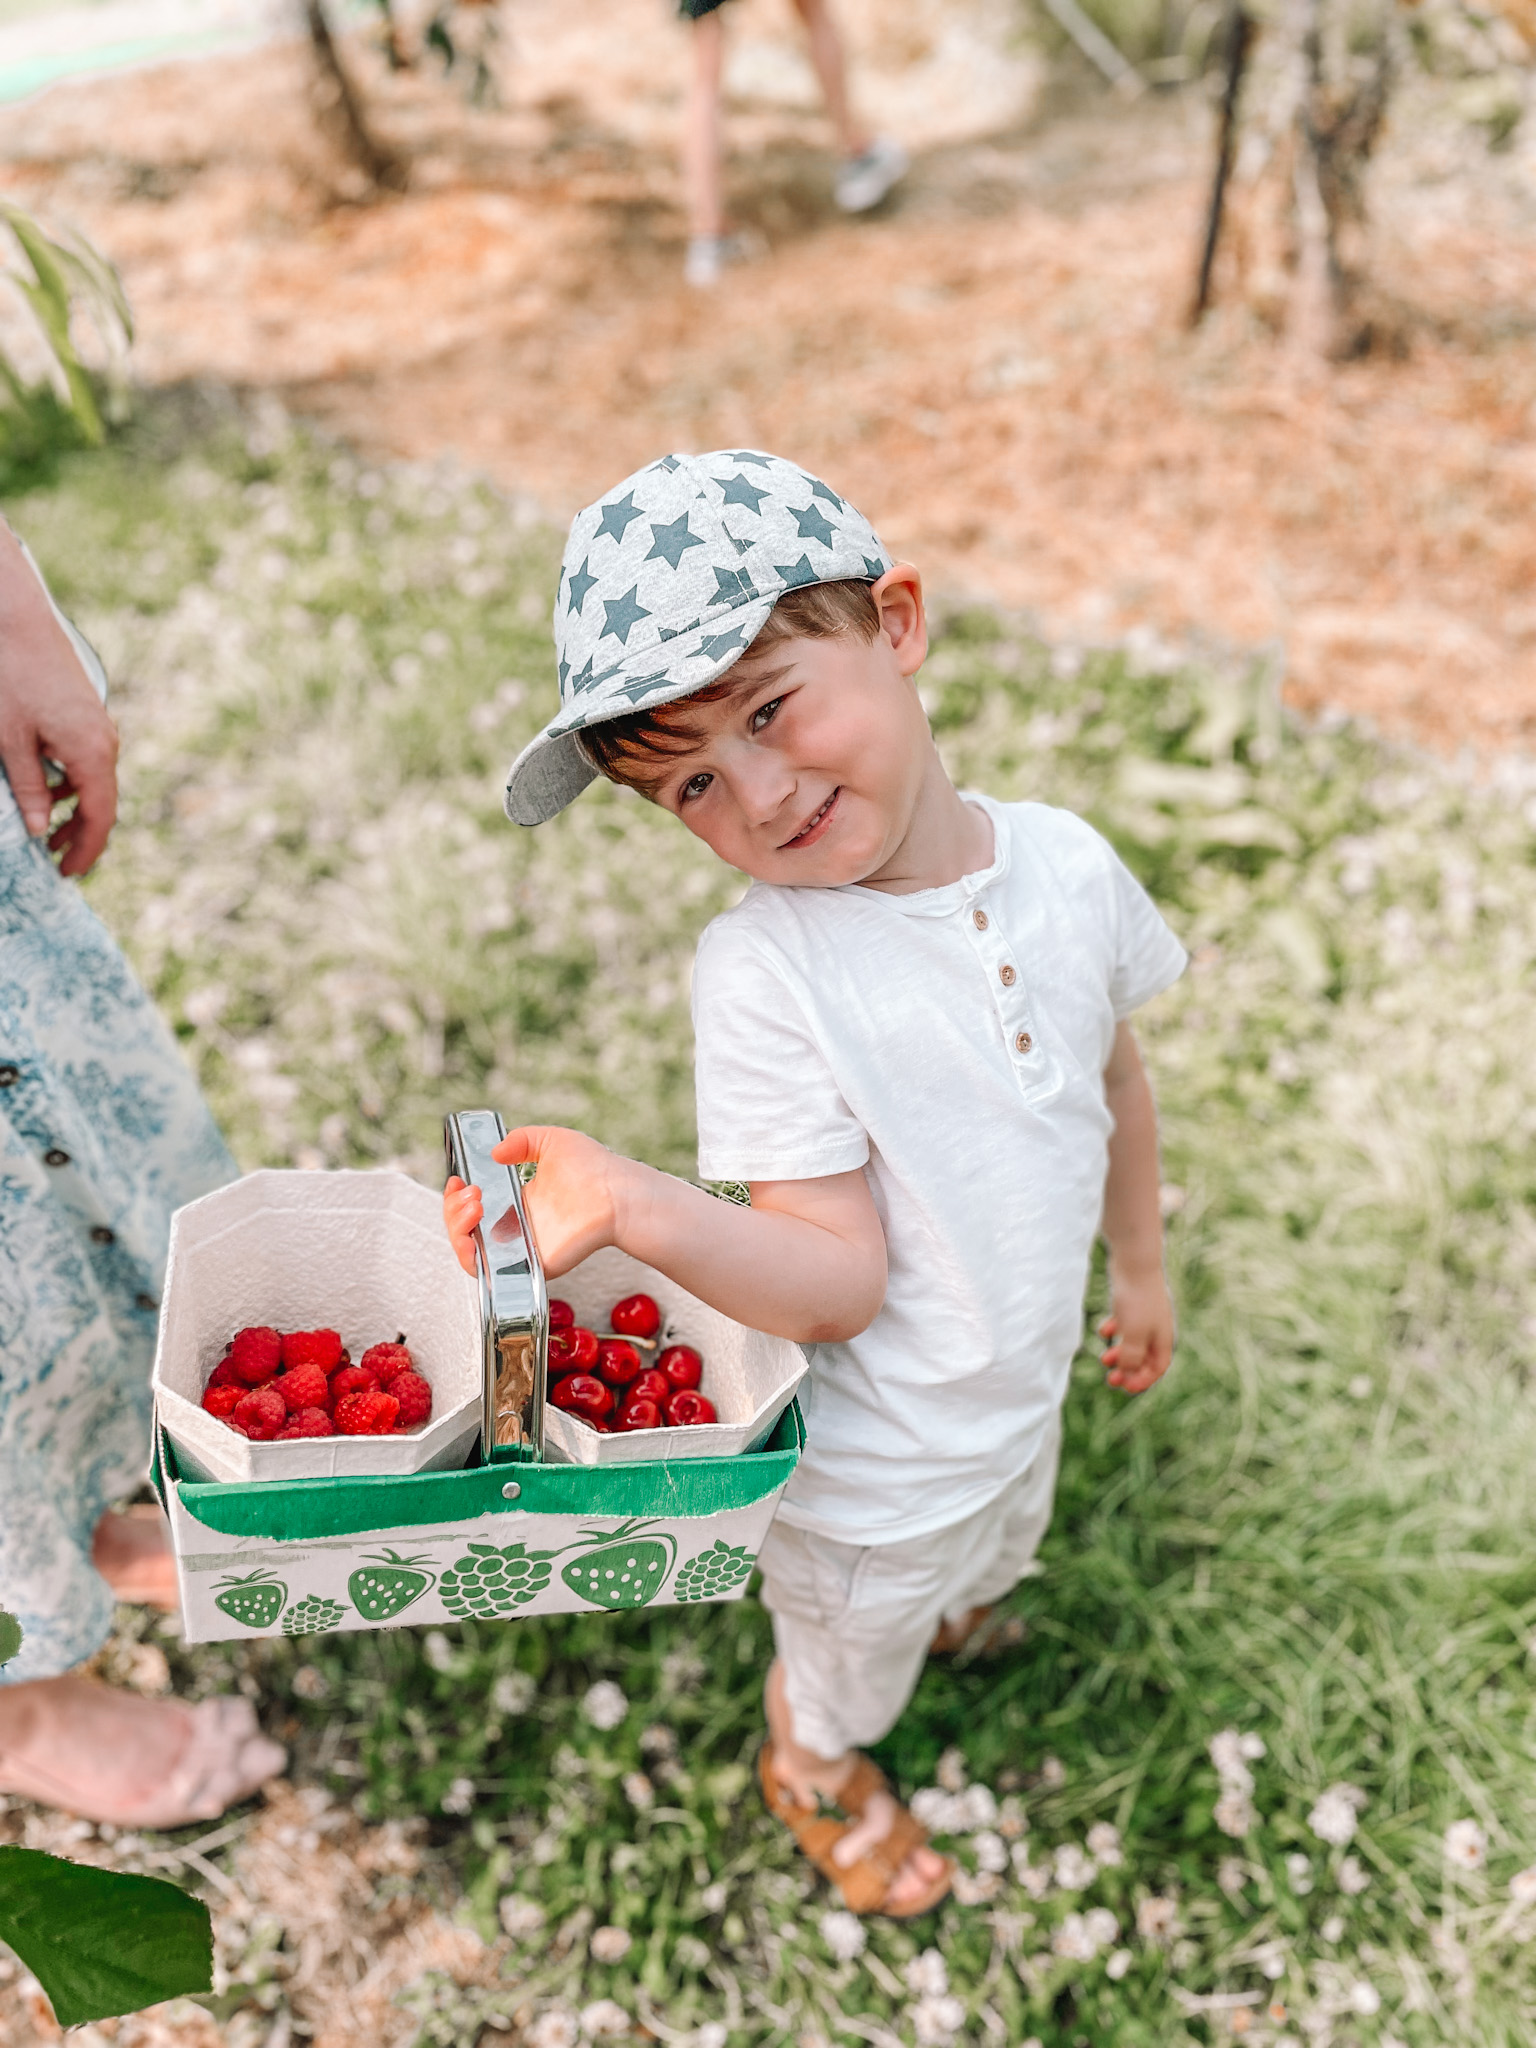 Max picking strawberries and raspberries on a sunny day